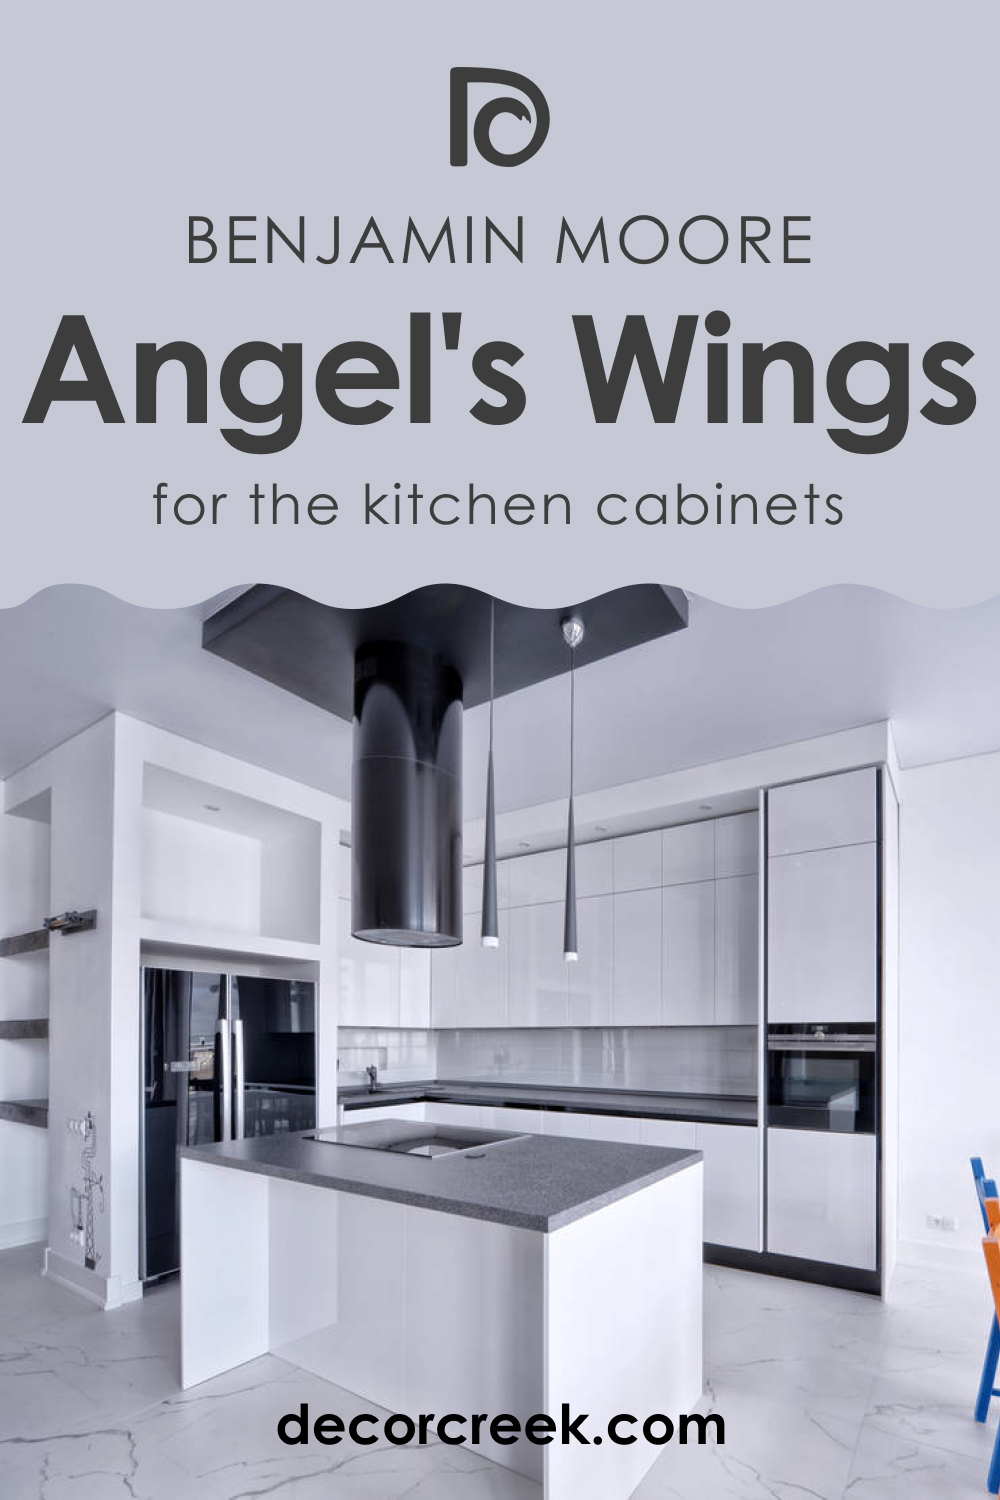 How to Use Angel's Wings 1423 on Kitchen Cabinets